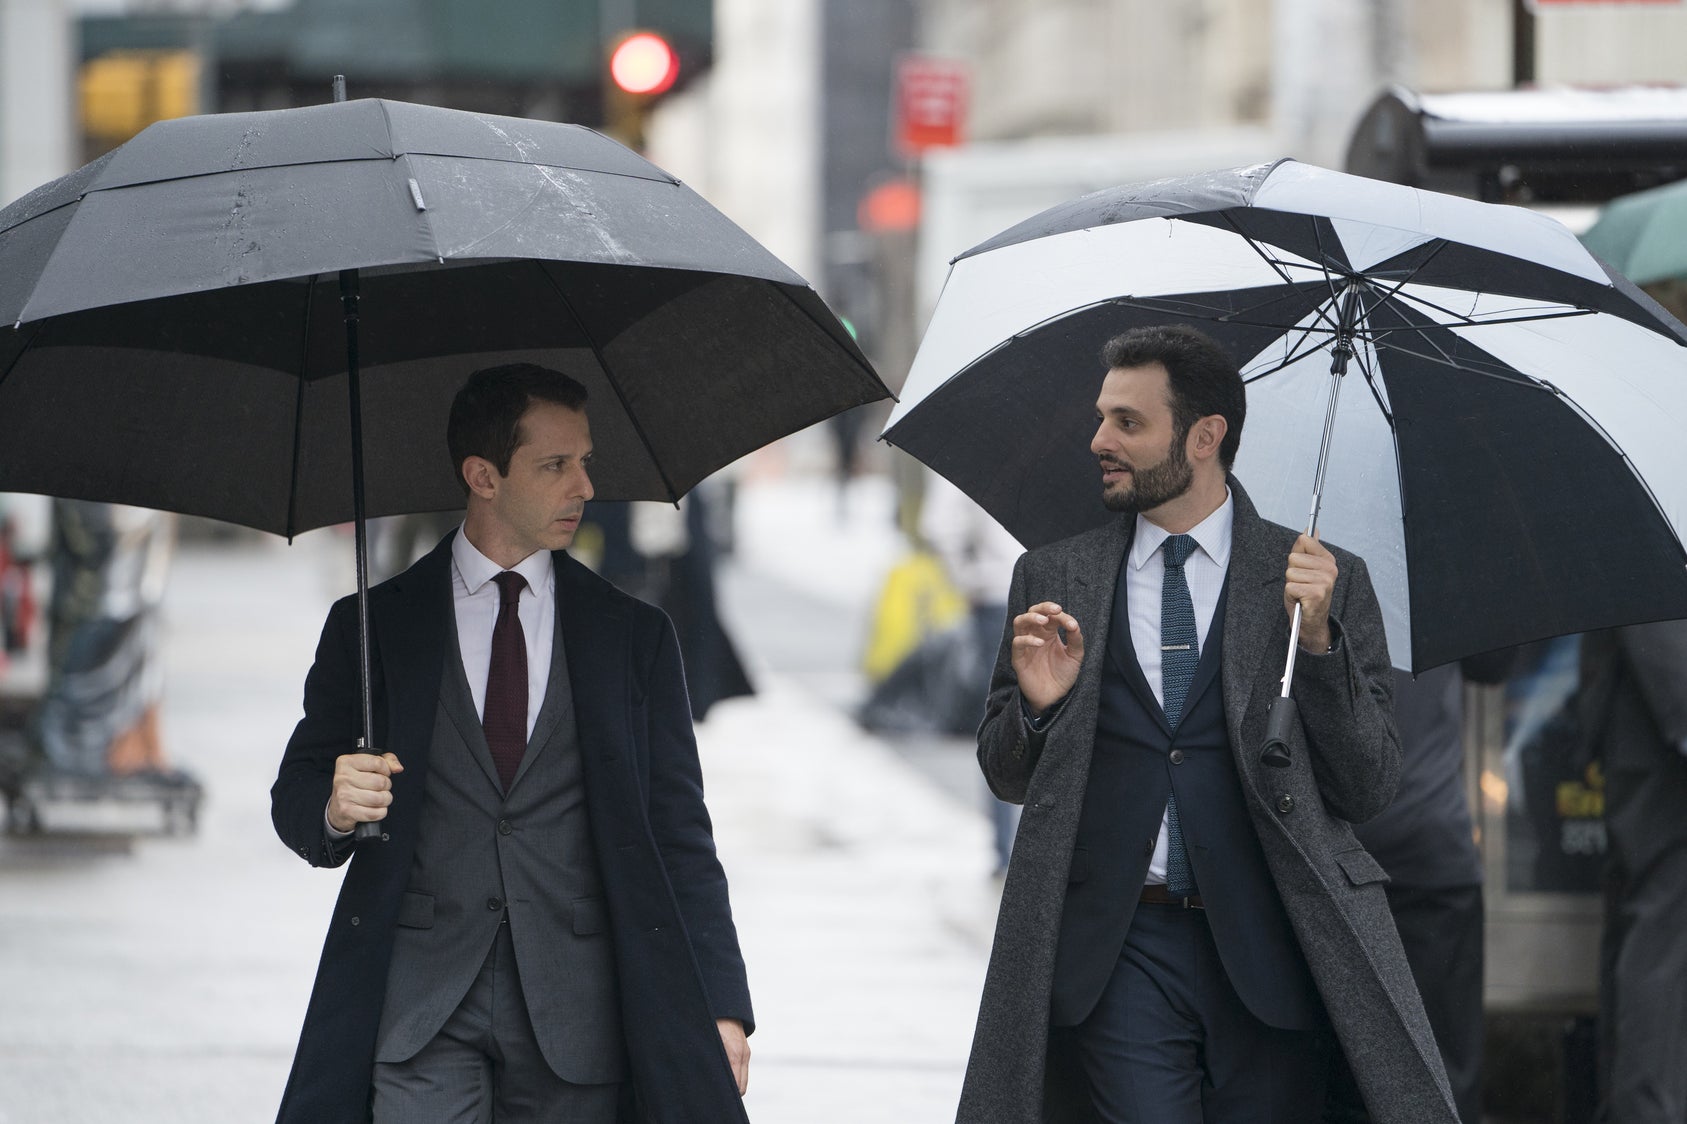 Kendall Roy and Stewy holding umbrellas, walking down the street.